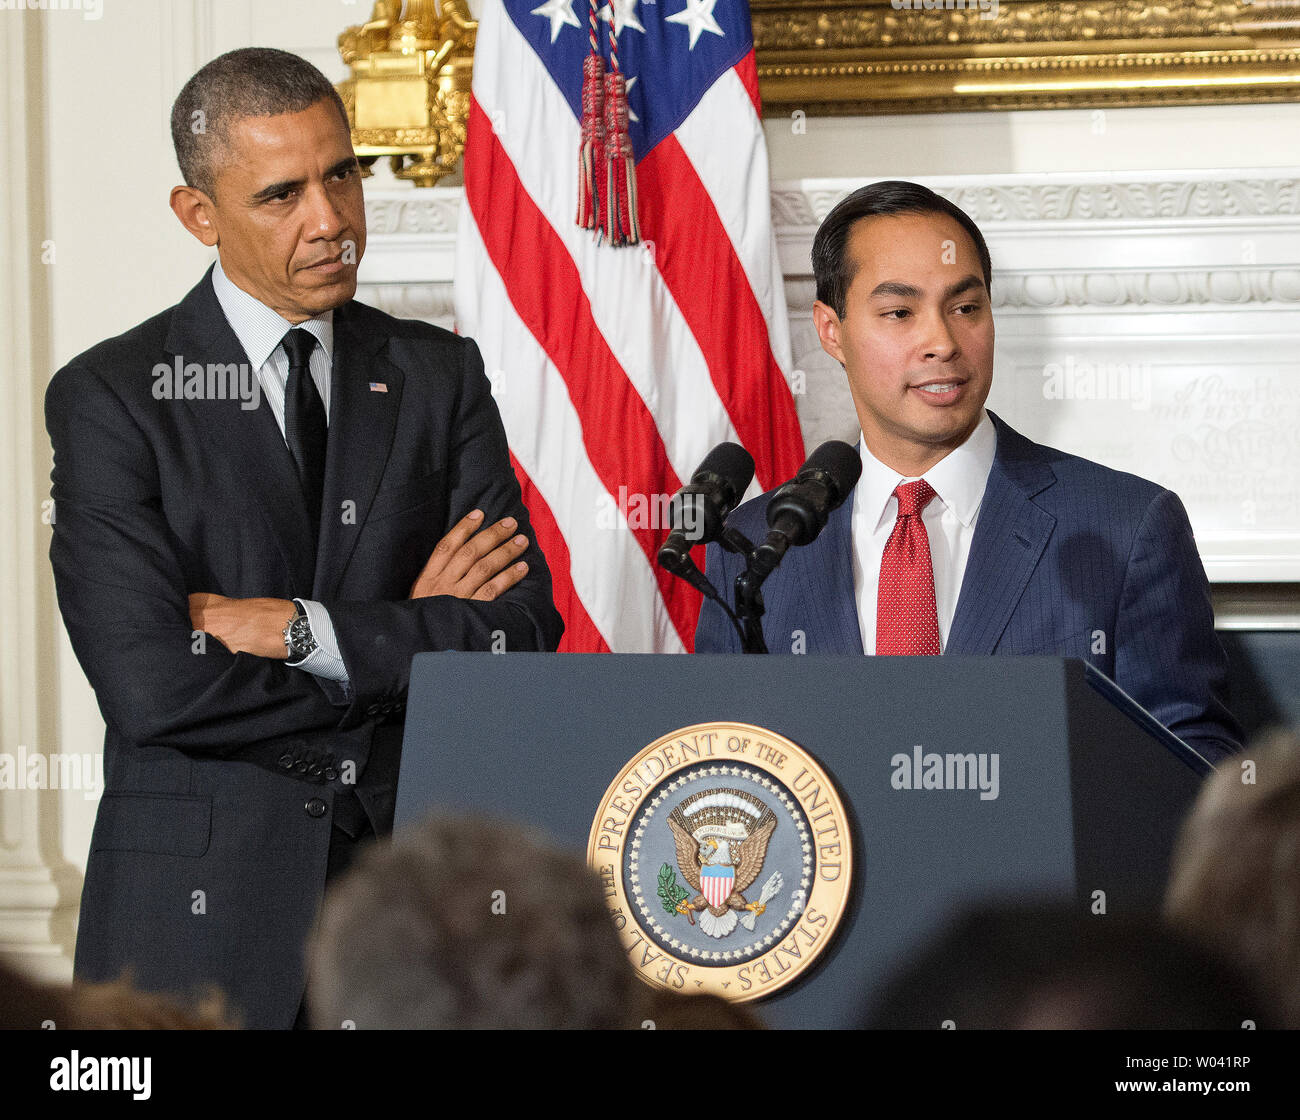 United States President Barack Obama, left,  announces his nomination of San Antonio Mayor Julián Castro, right, as U.S. Secretary of Housing and Urban Development (HUD) replacing current HUD Secretary Shaun Donovan (not pictured) who has been nominated to be Office of Management and Budget (OMB) Director in the State Dining Room of the White House in Washington, D.C. on Friday, May 23, 2014.Credit: Ron Sachs / Pool via CNP /MediaPunch Stock Photo